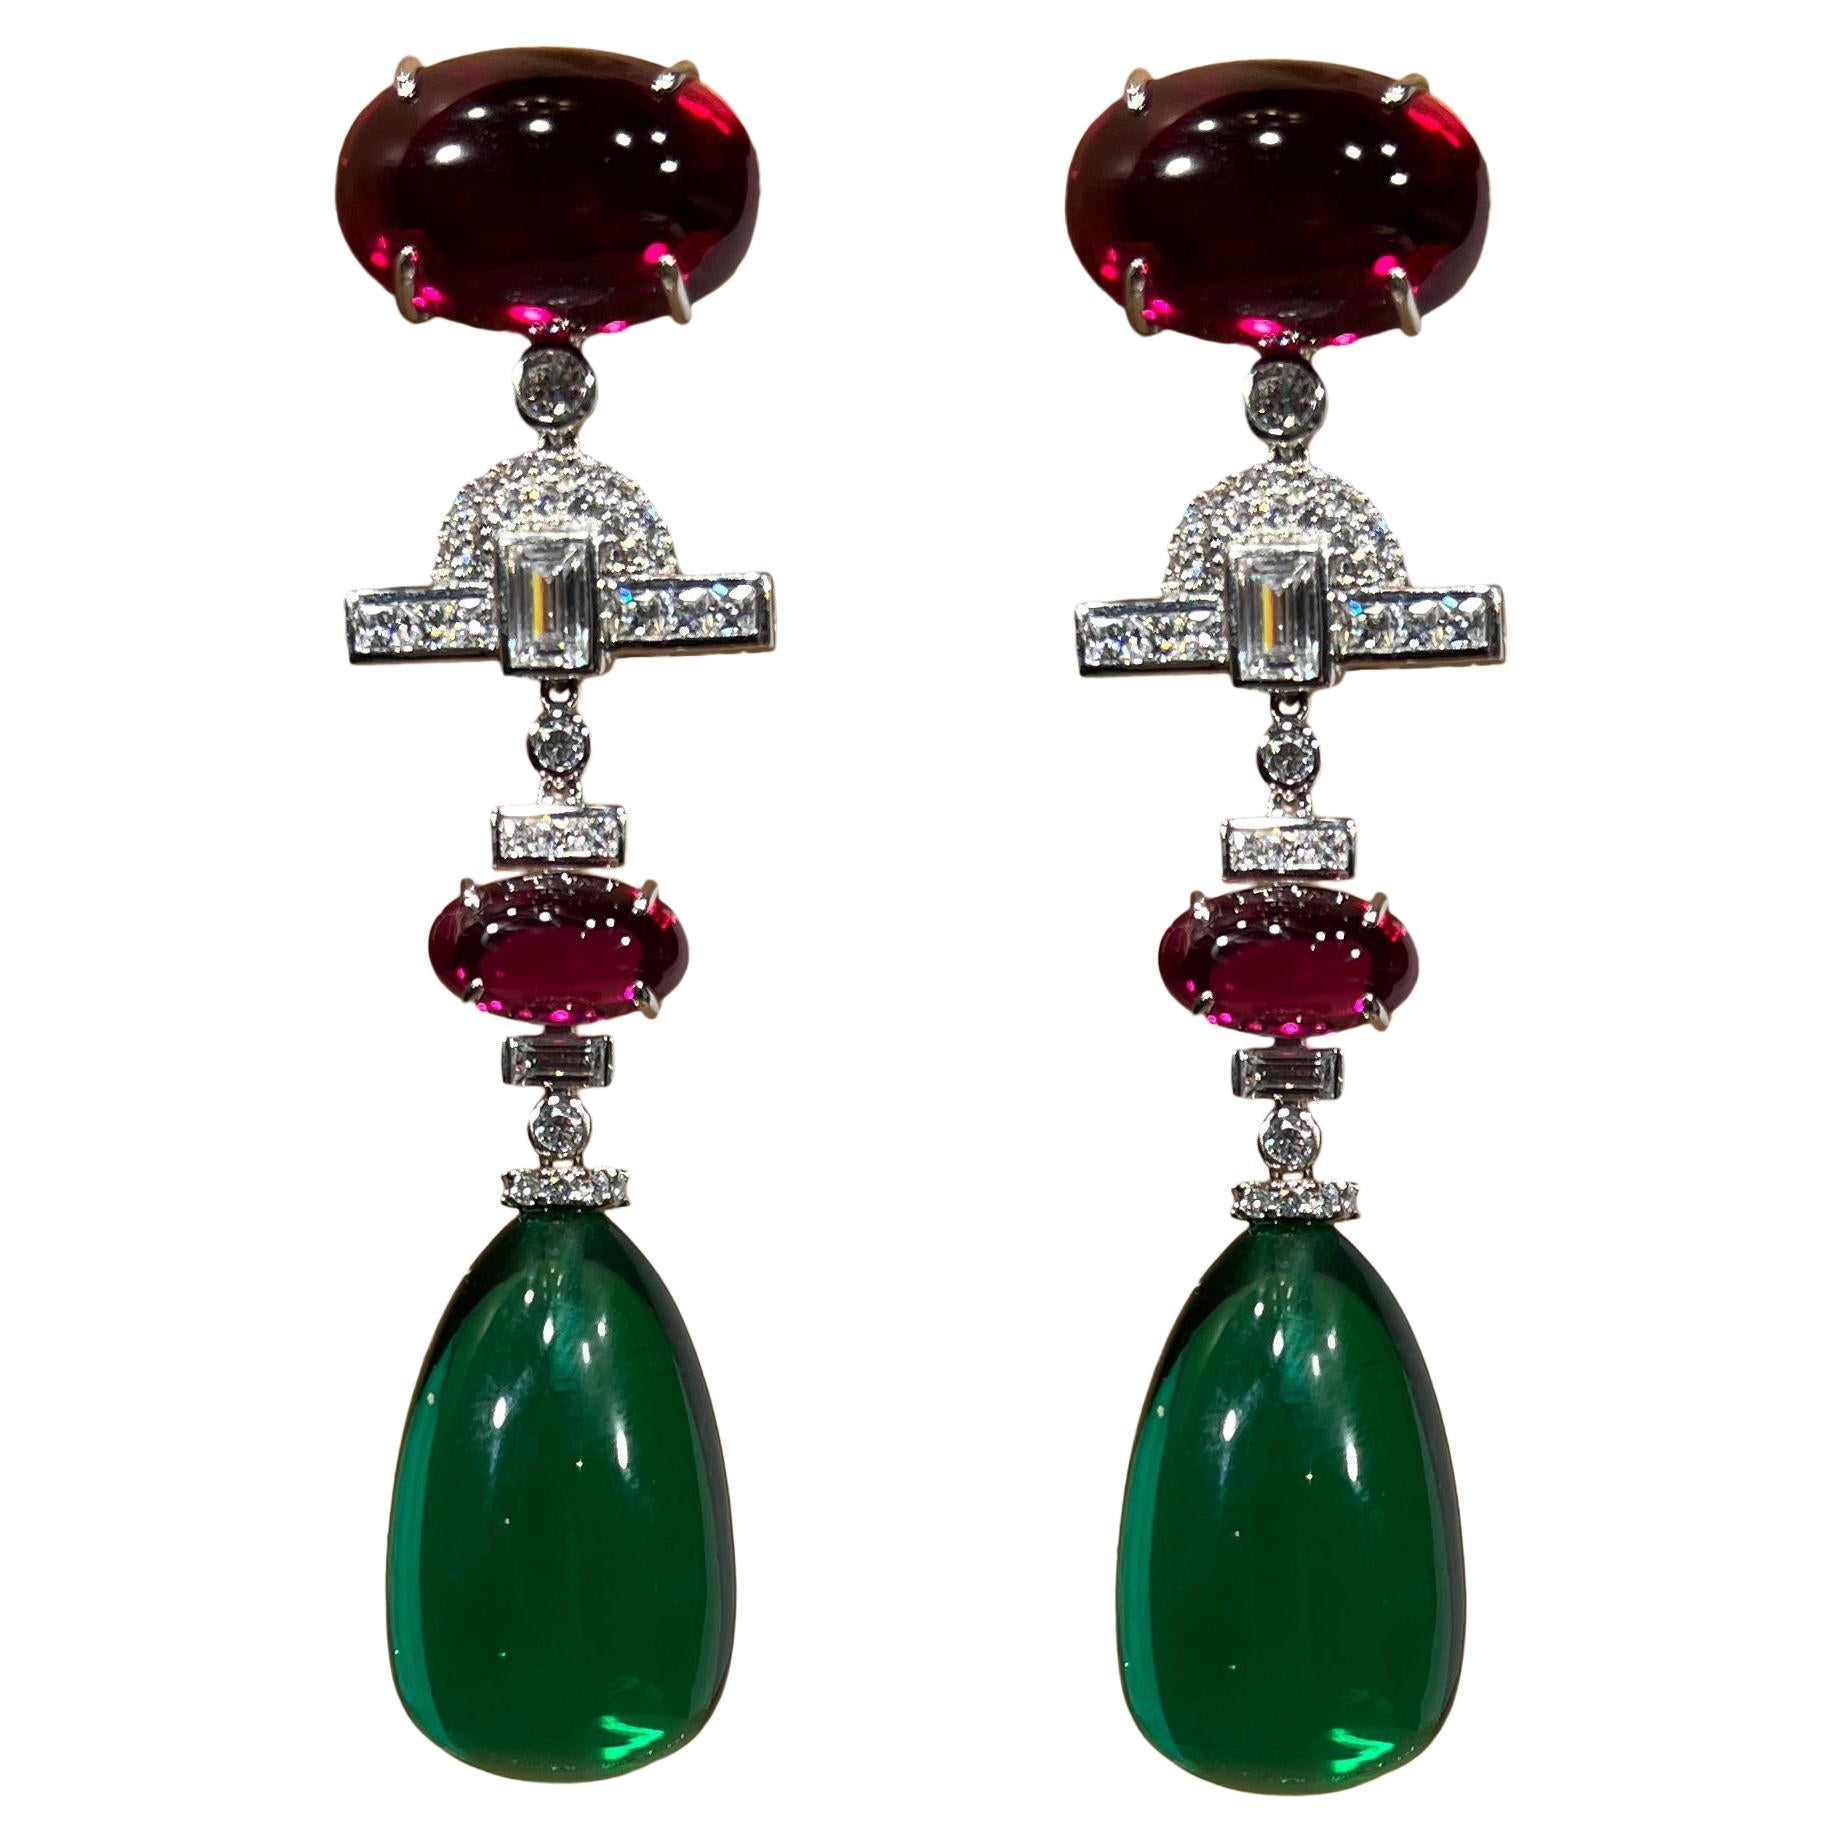 Art Deco  Costume Jewelry Cartier Style Emerald  Long Earrings by Clive Kandel